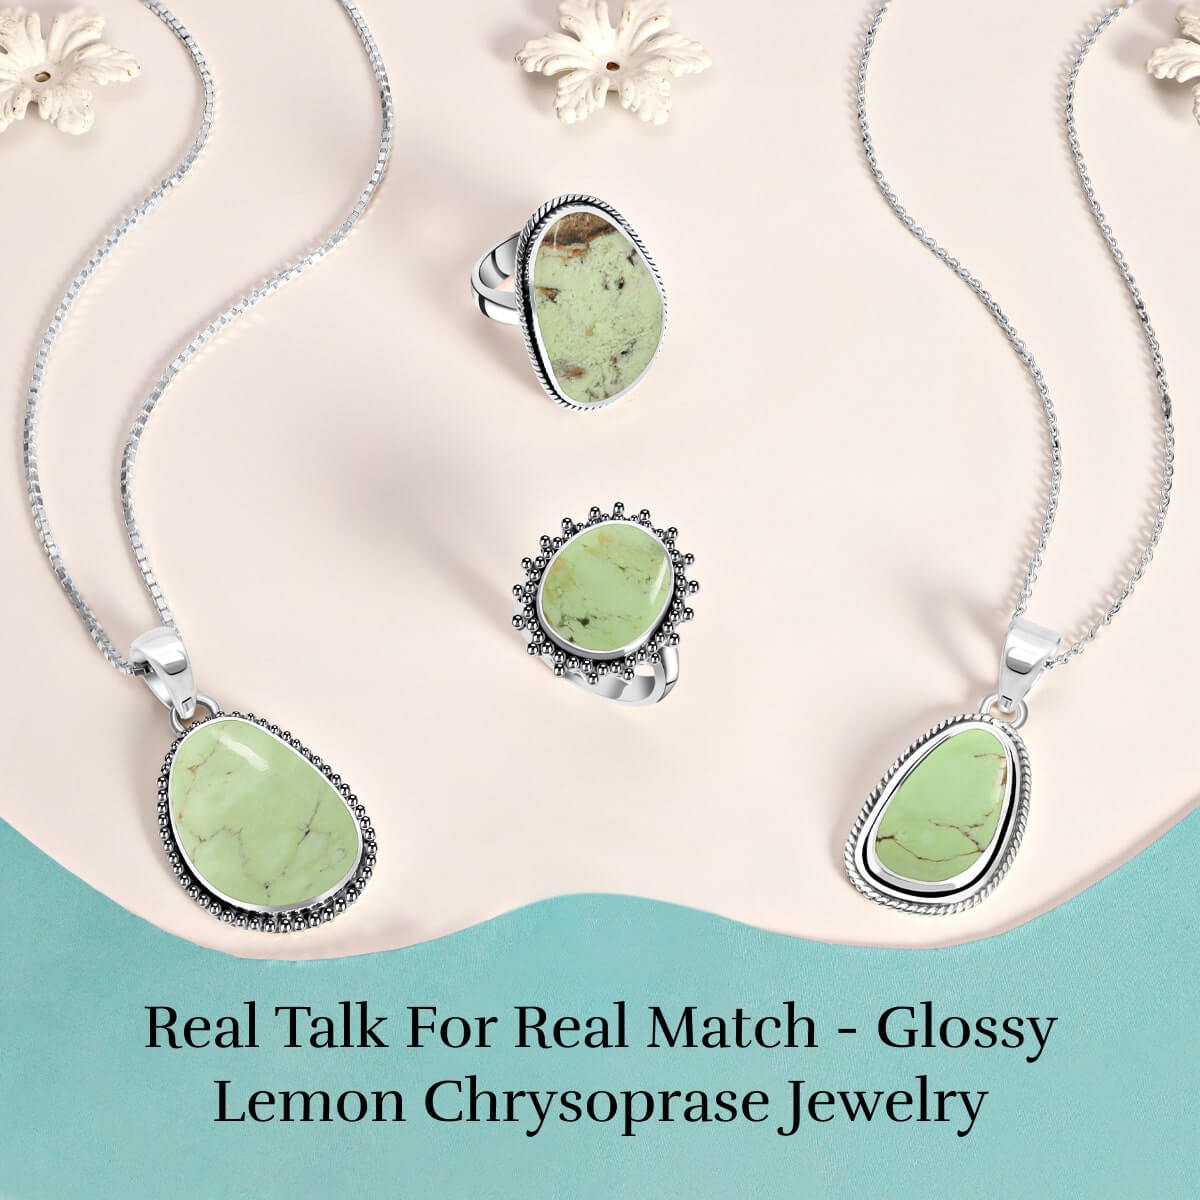 Some Ornamental Ideas For Lemon Chrysoprase Jewelry That Looks To Be Perfect For The Red Carpet